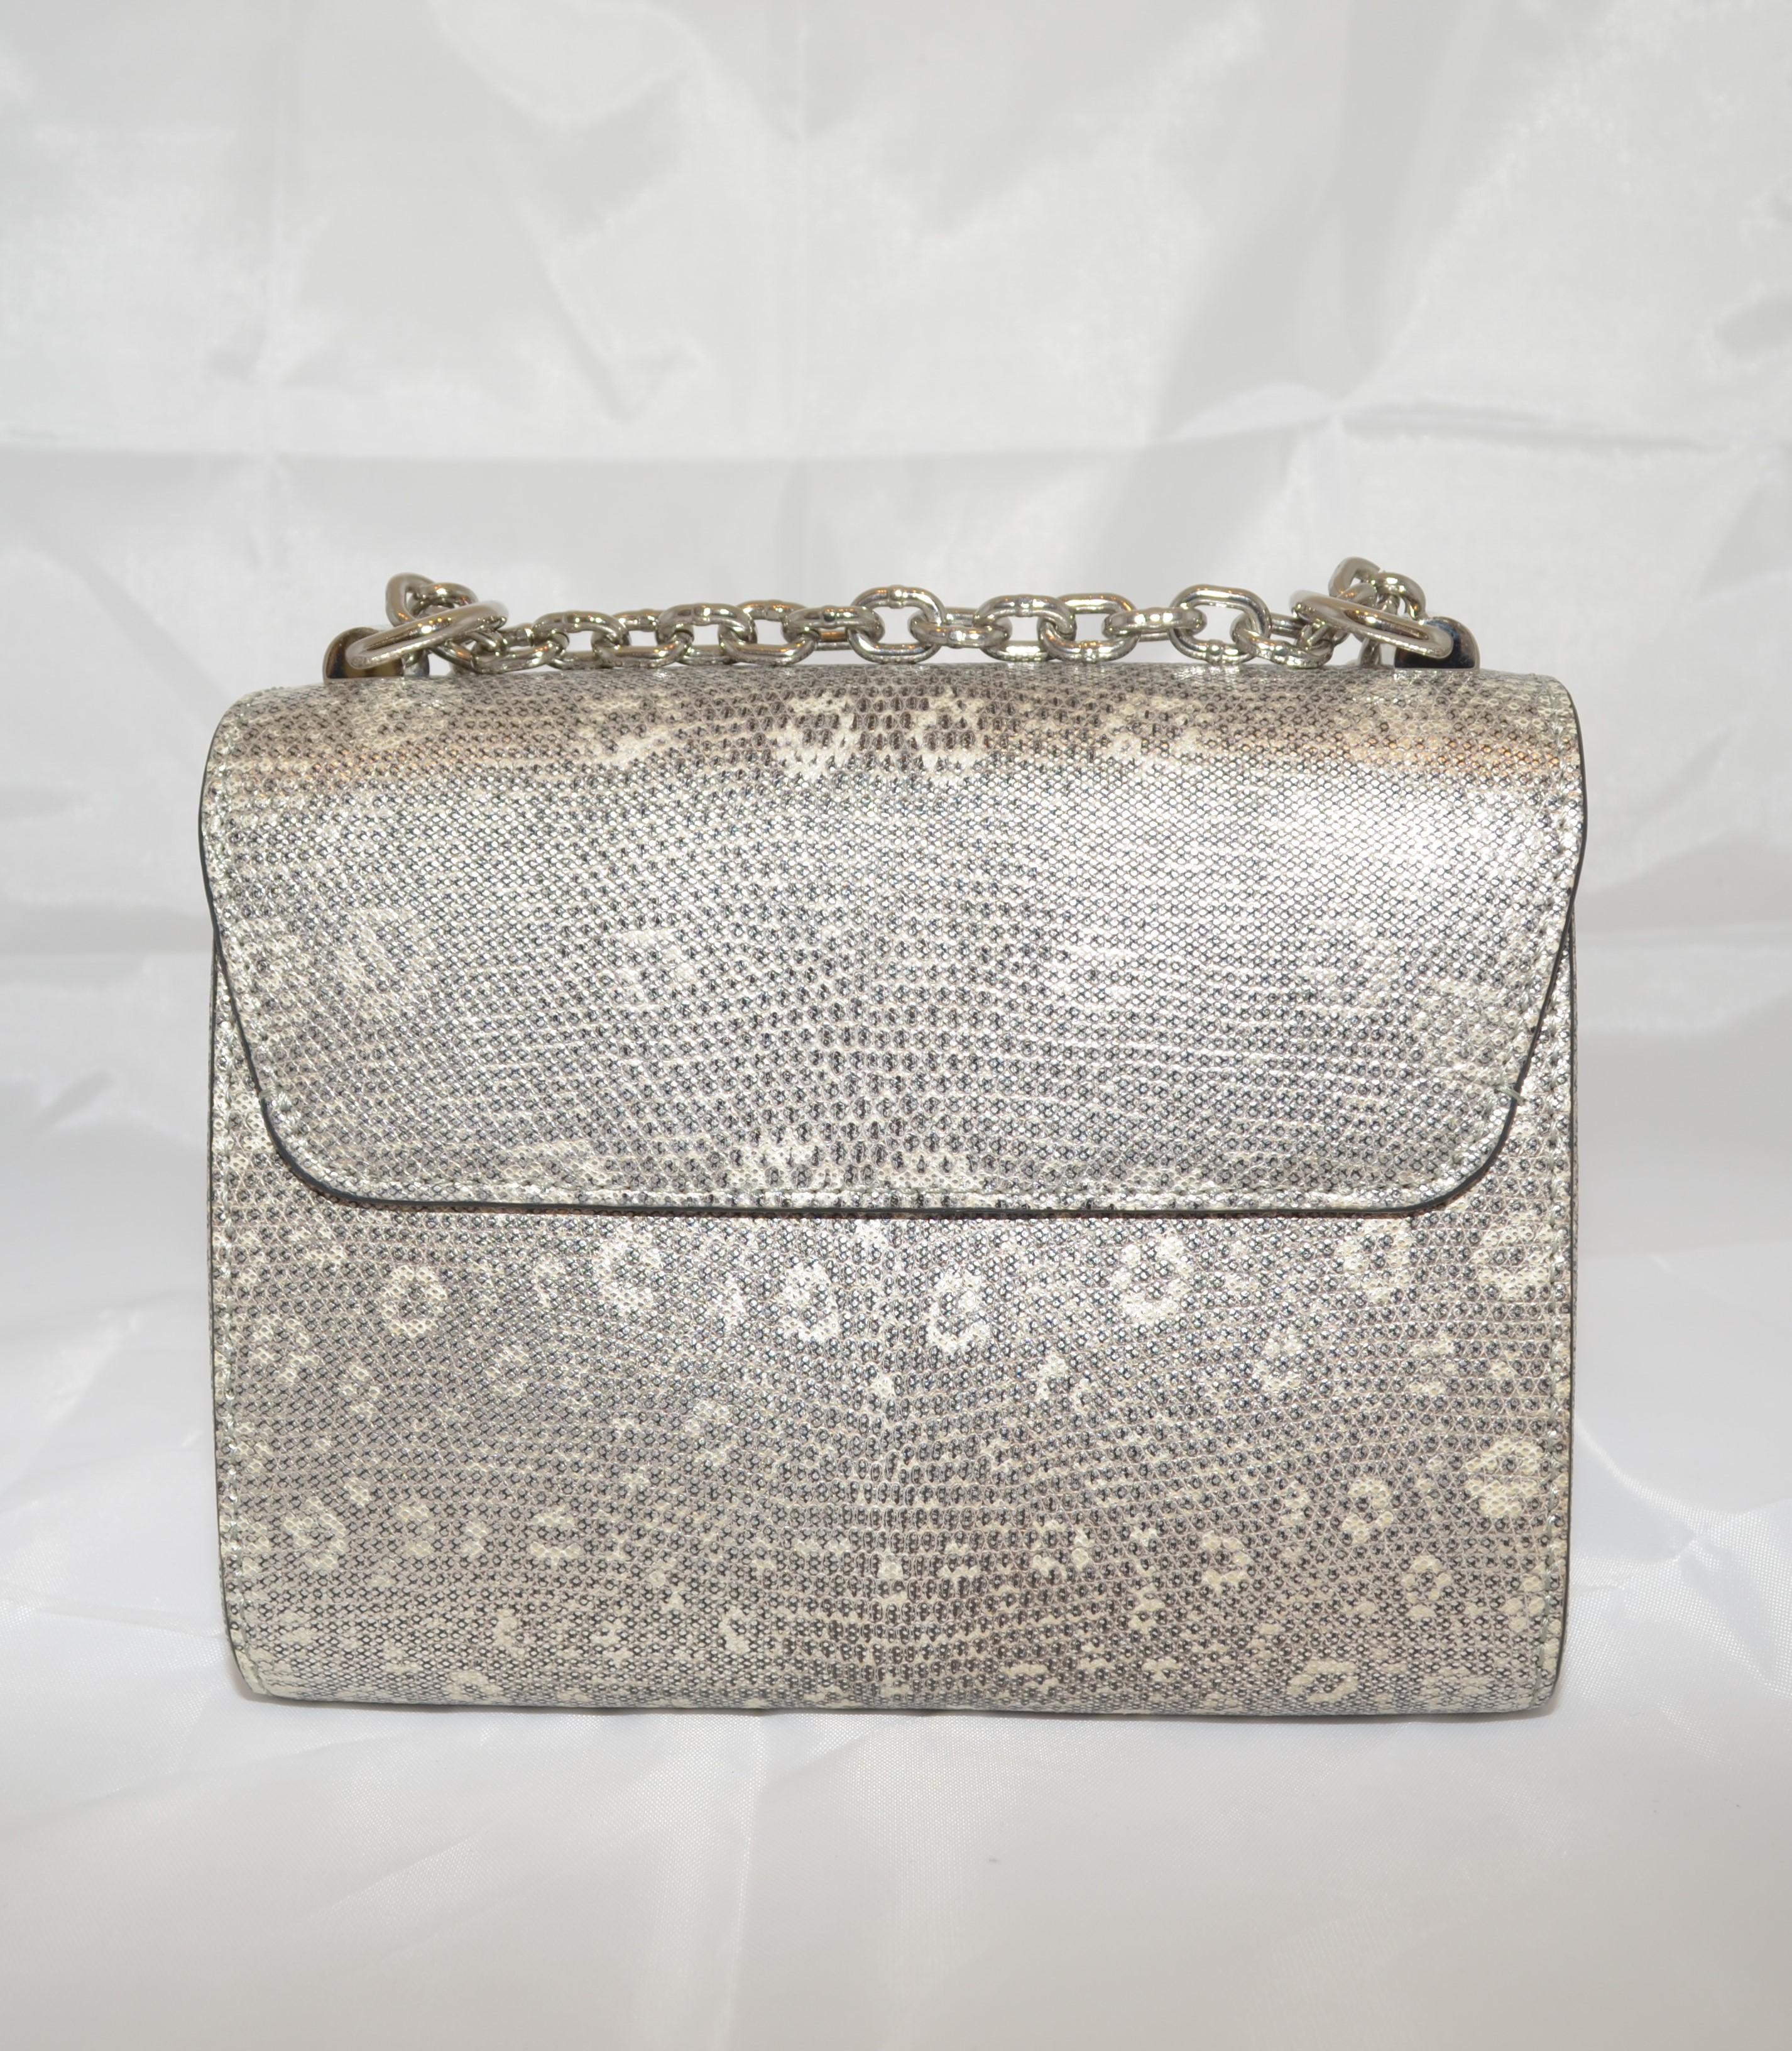 Louis Vuitton Silver Lizard Twist PM Handbag Limited Edition with Cites In Excellent Condition In Carmel, CA